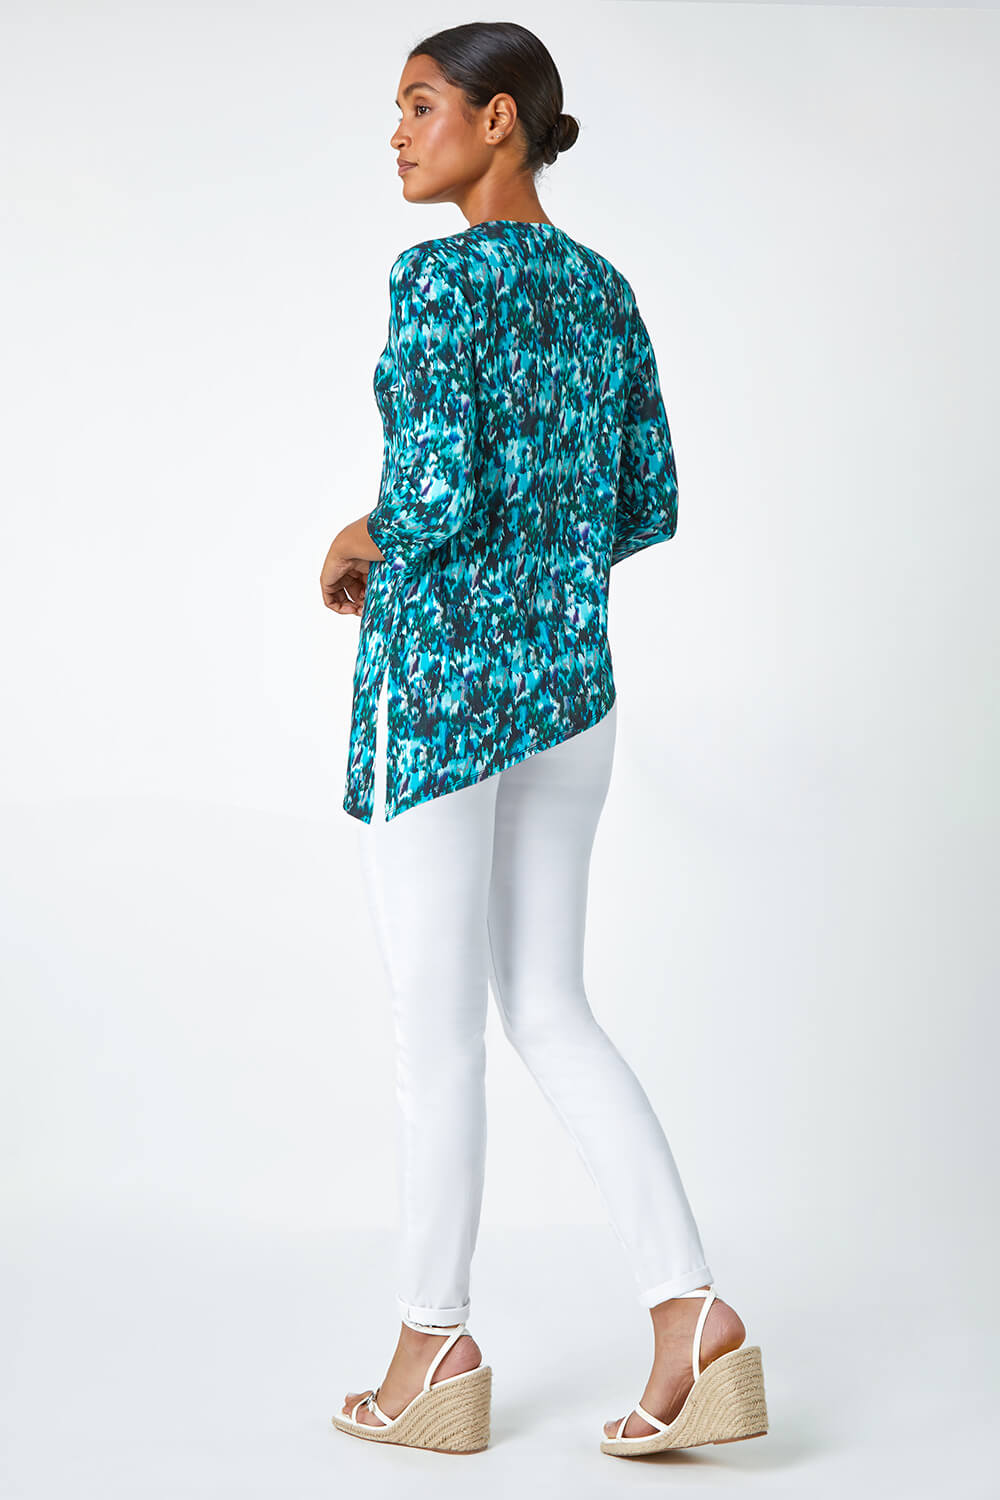 Turquoise Abstract Print Asymmetric Stretch Top, Image 3 of 5